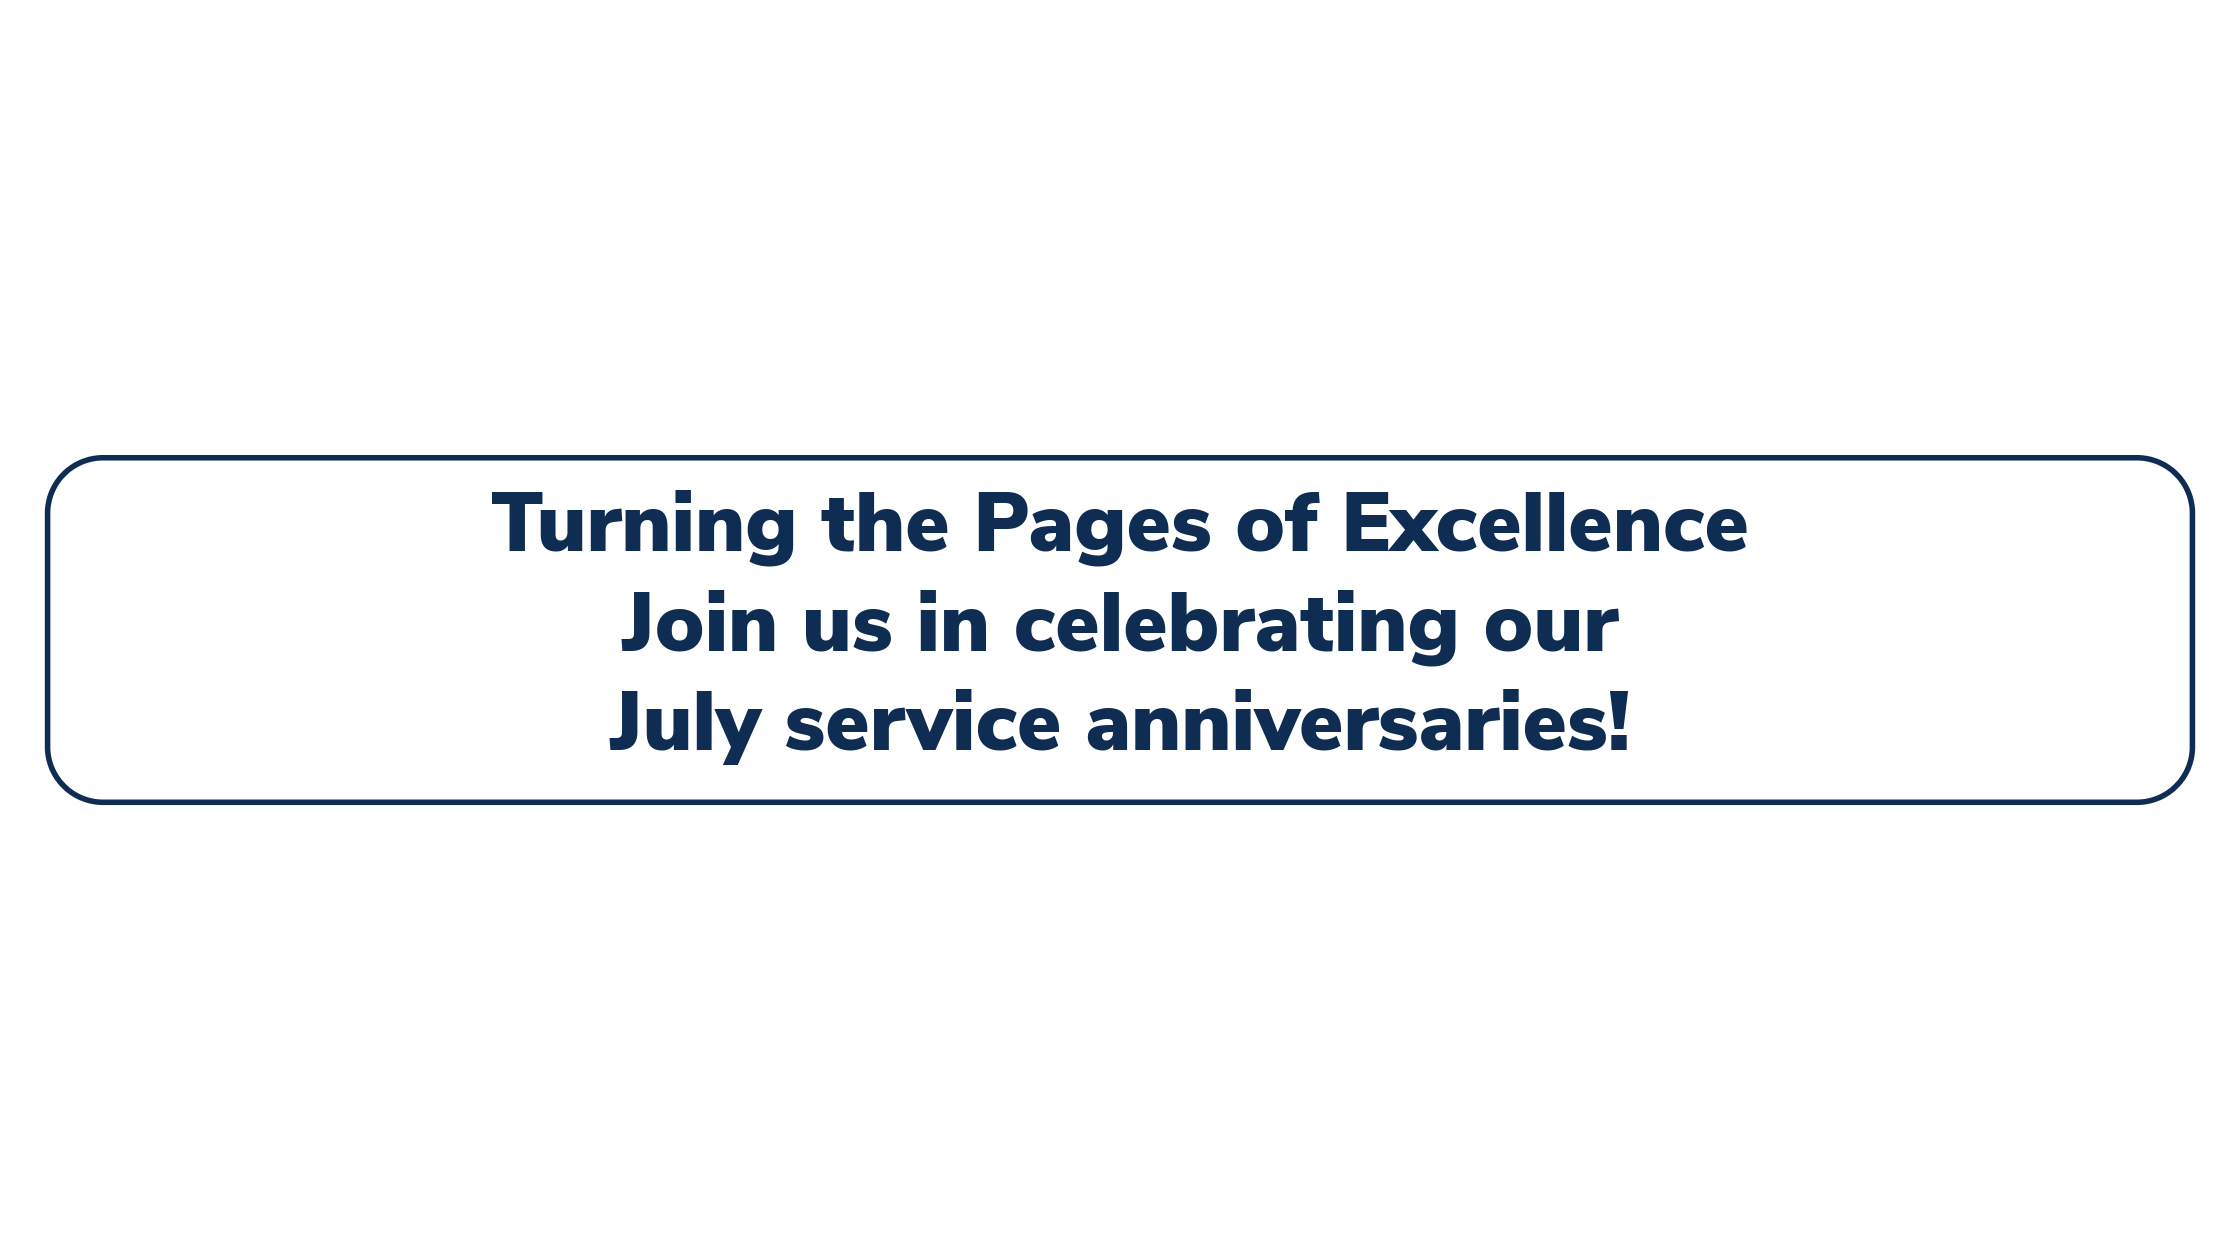 Turning the Pages of Excellence: July Service Anniversaries